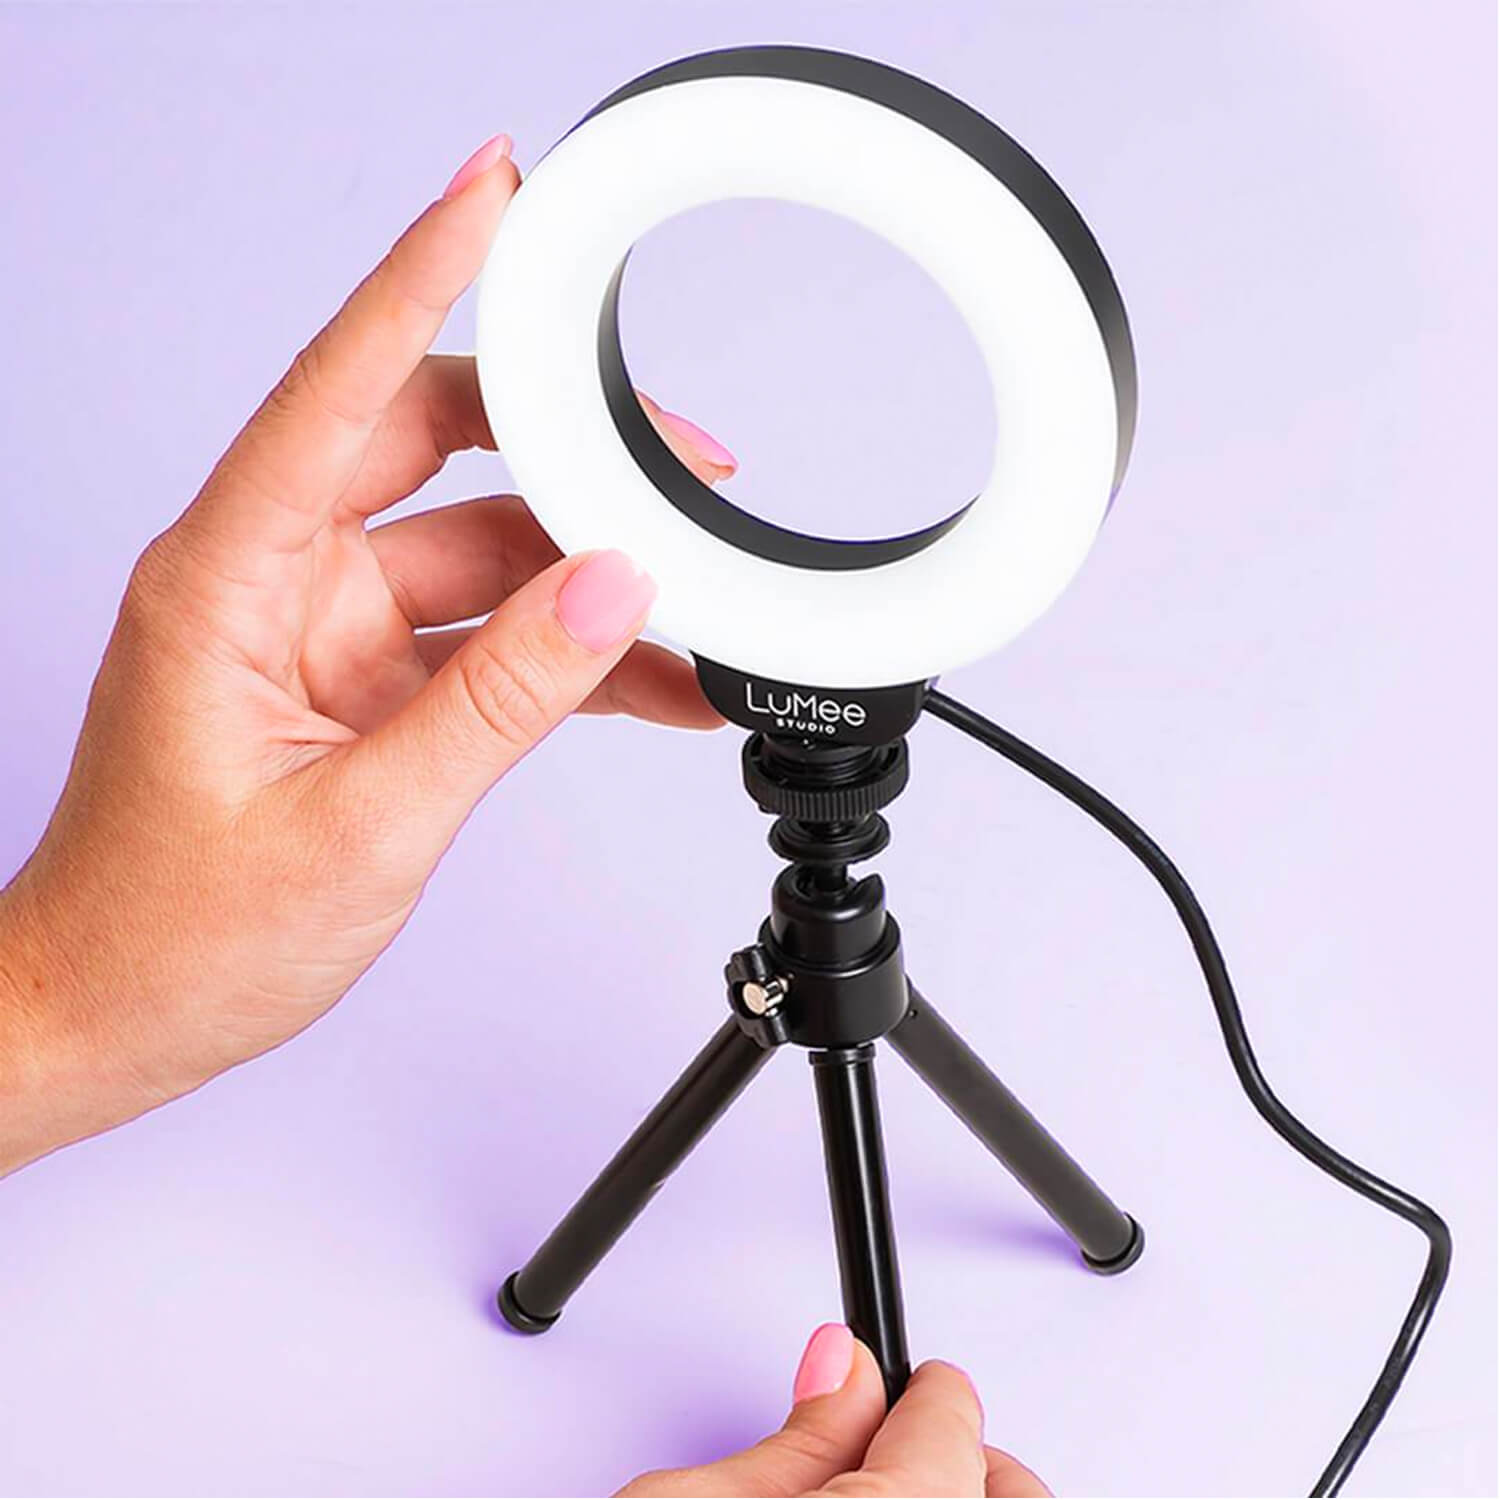 Case-Mate LuMee Studio 4” Ring Light with TriPod Stand Black